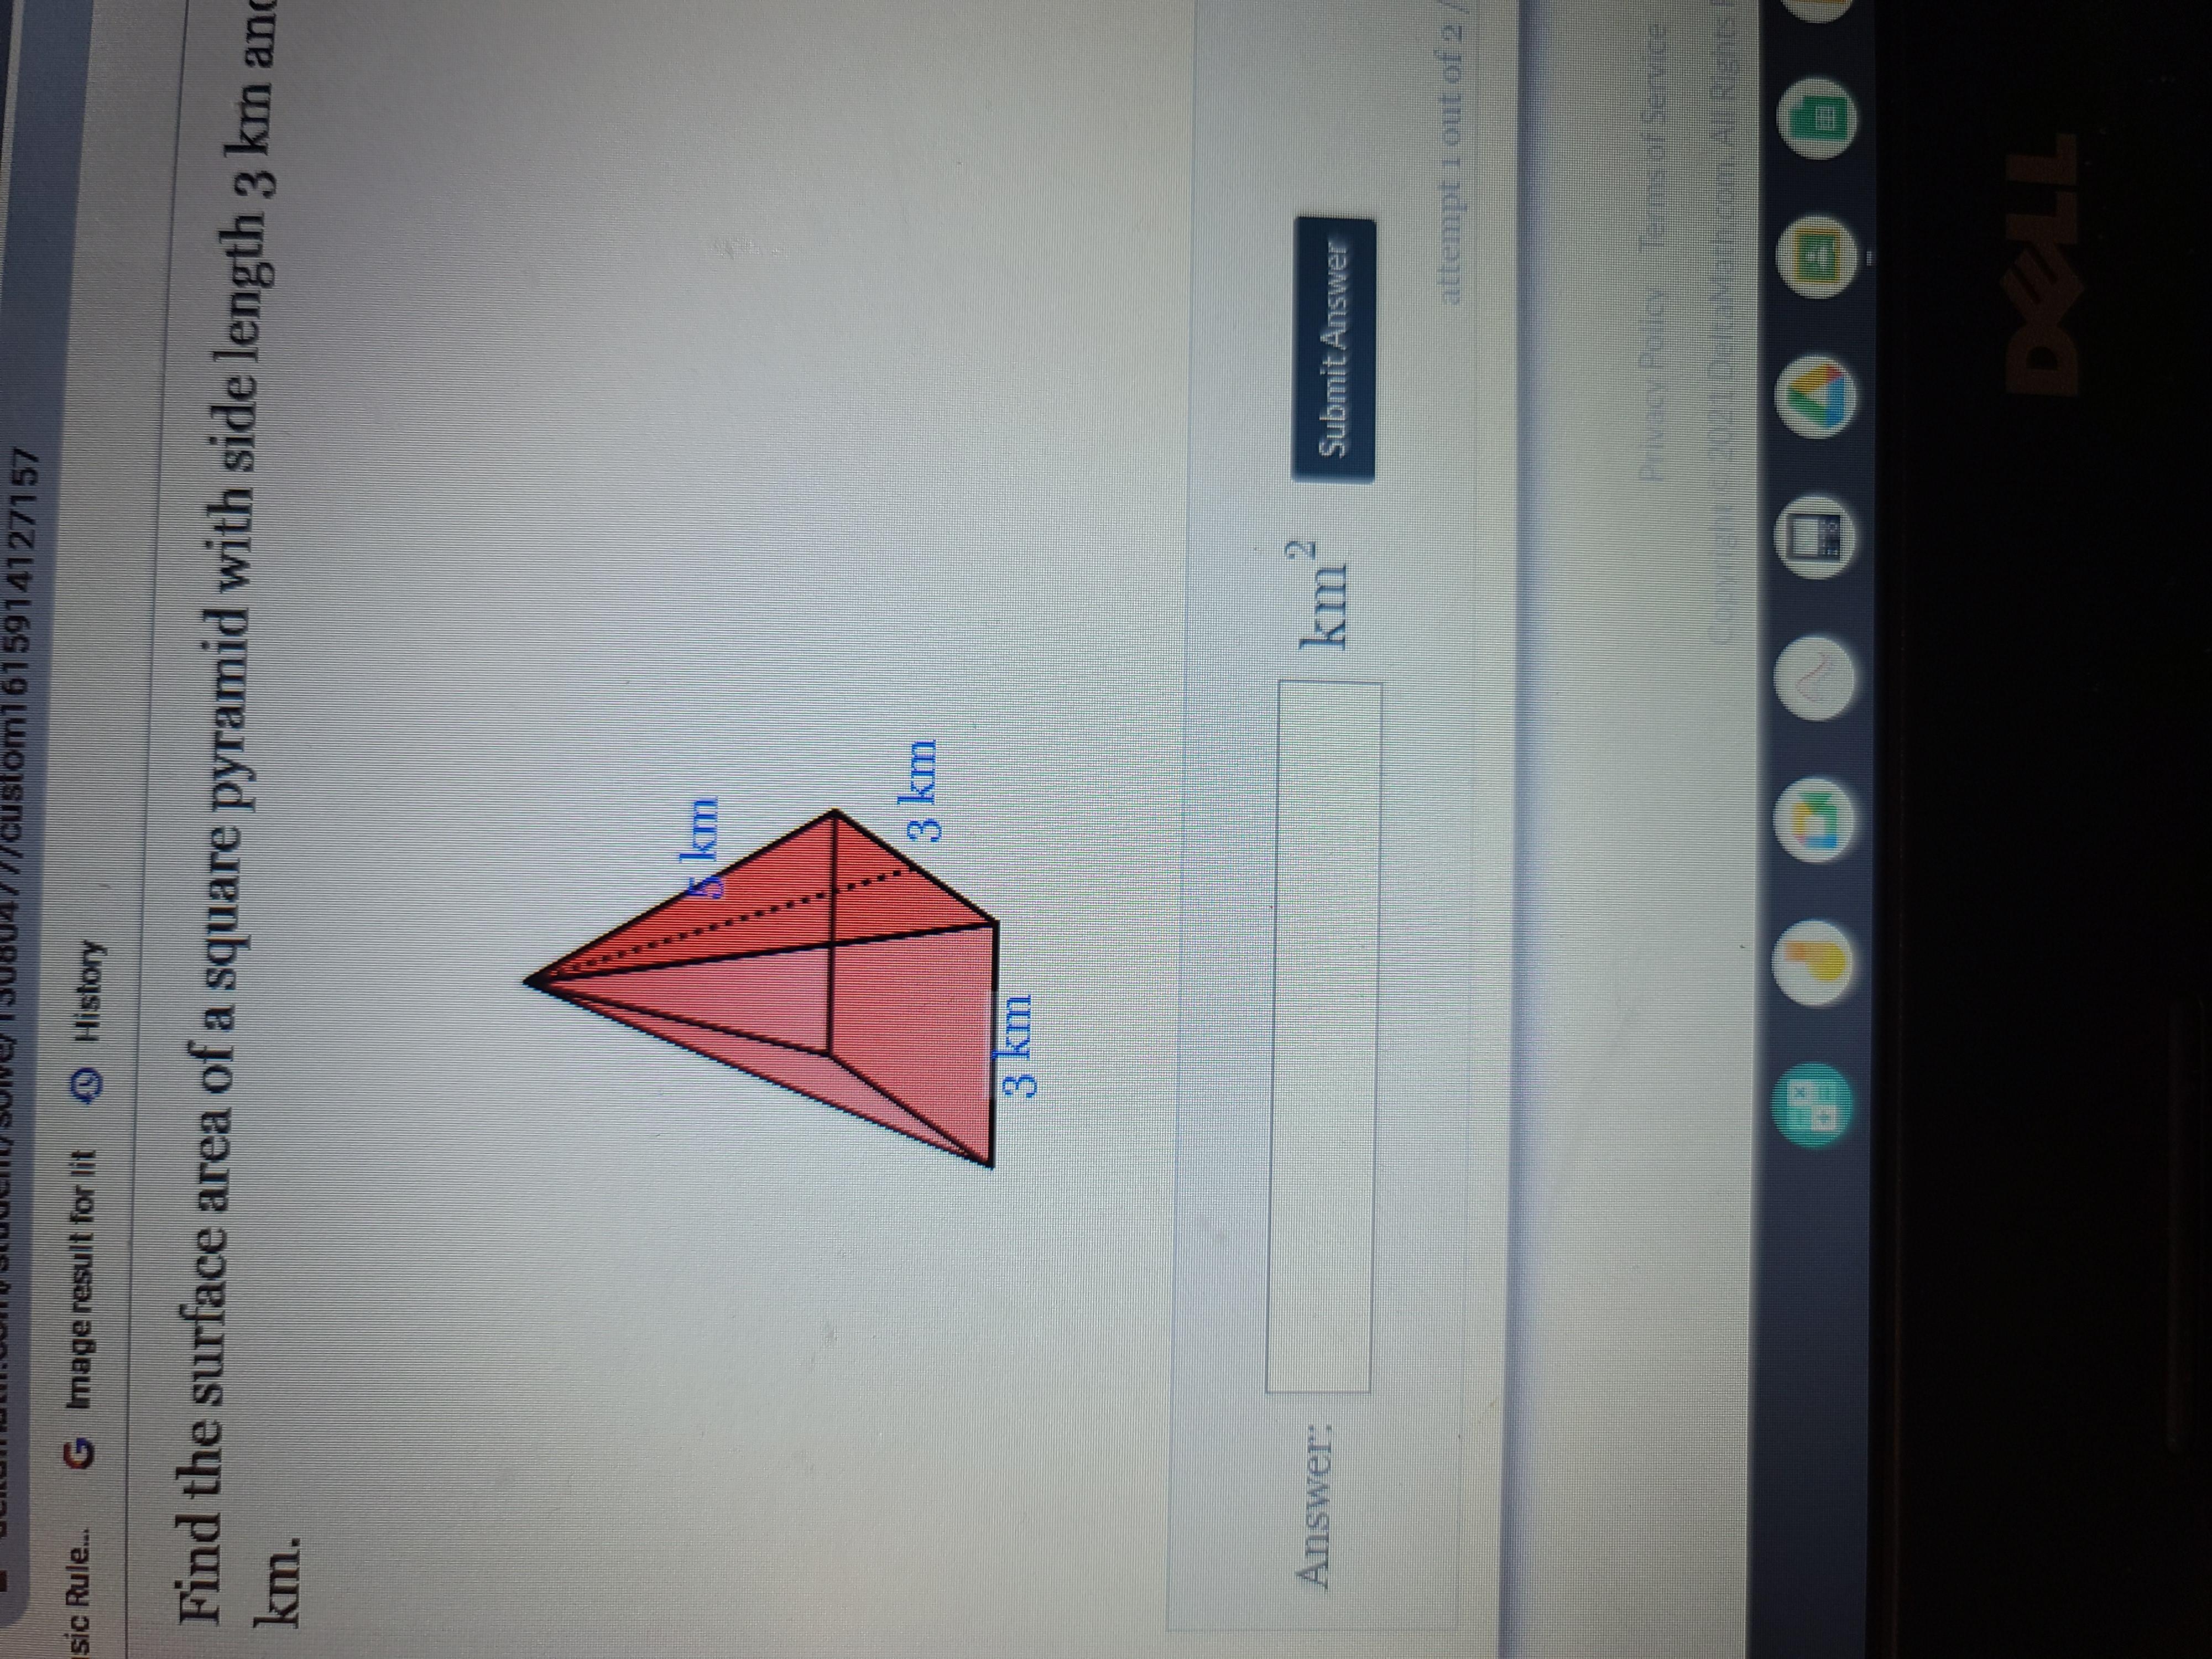 Find Thevsurface Area Of A Square Pyramid Wuth Side Length 3 Km And Slant Height 5 Km